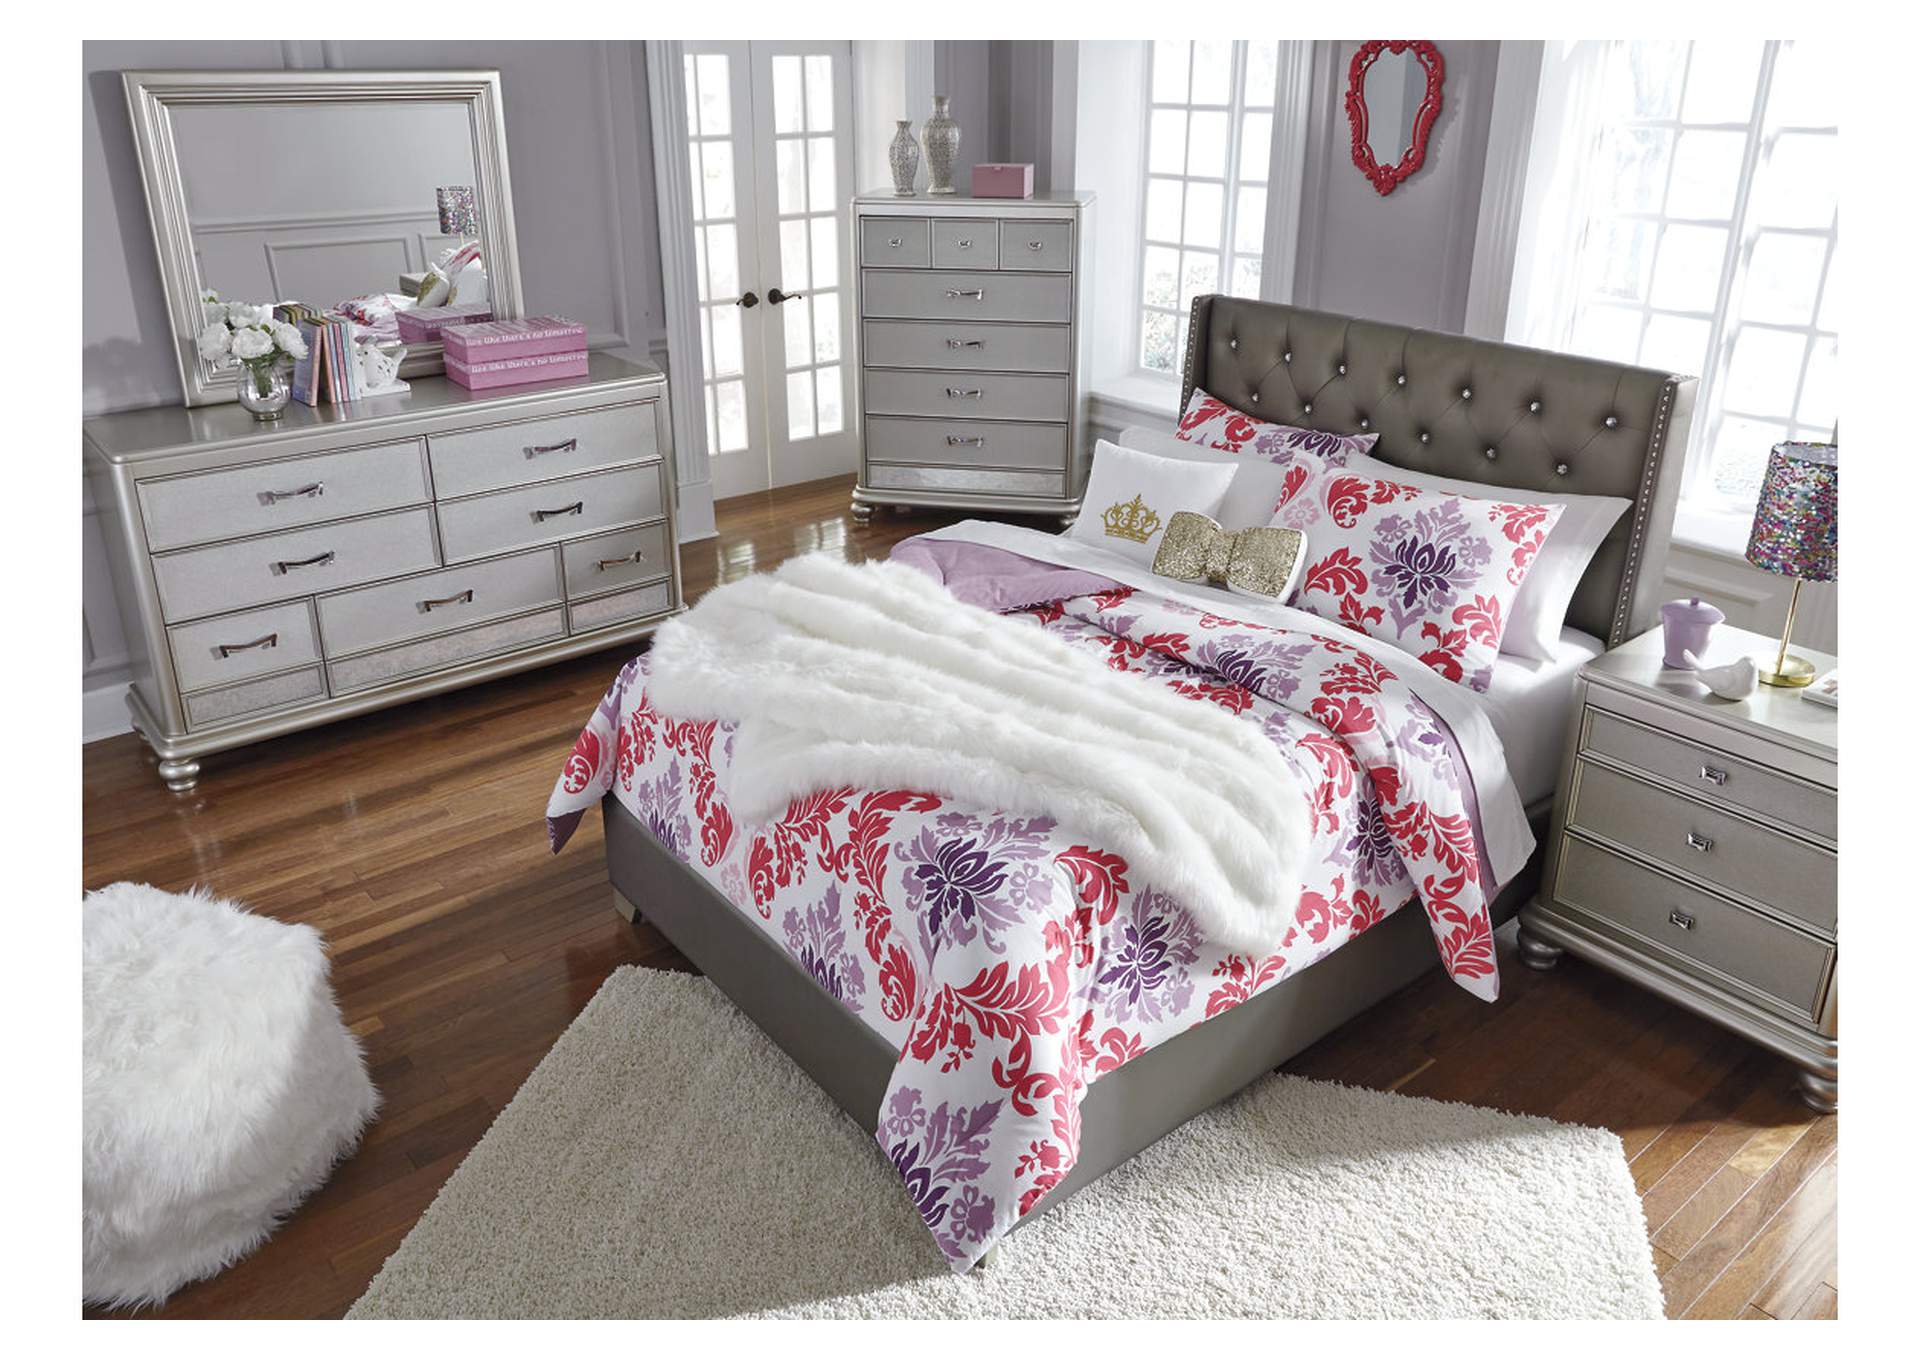 Coralayne Full Upholstered Bed,Signature Design By Ashley